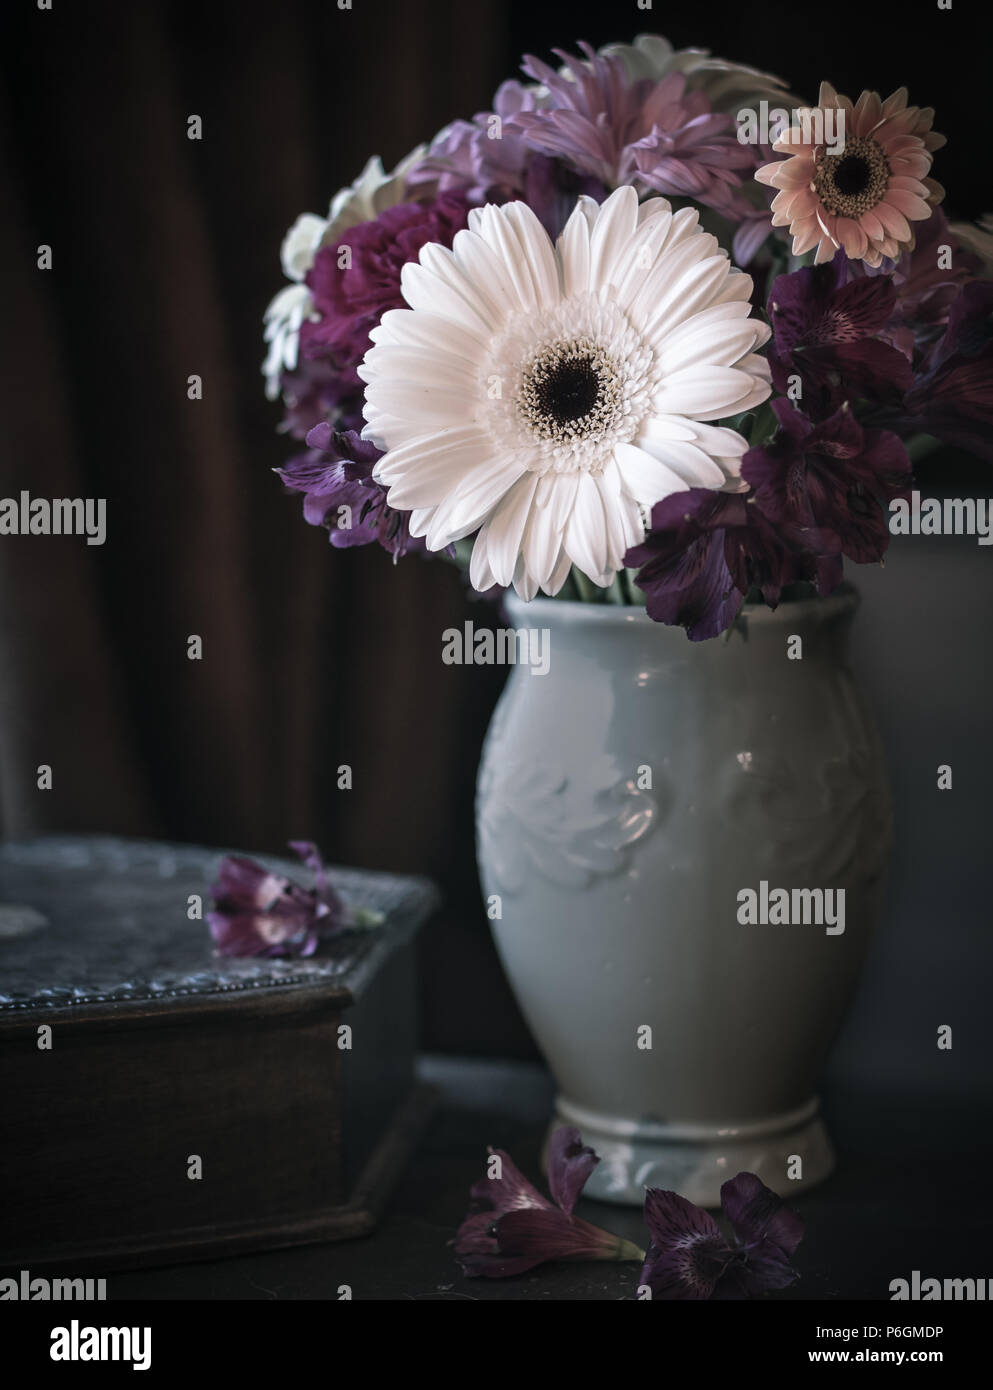 Dark colored flowers in a vase with dark background and muted colors. Stock Photo